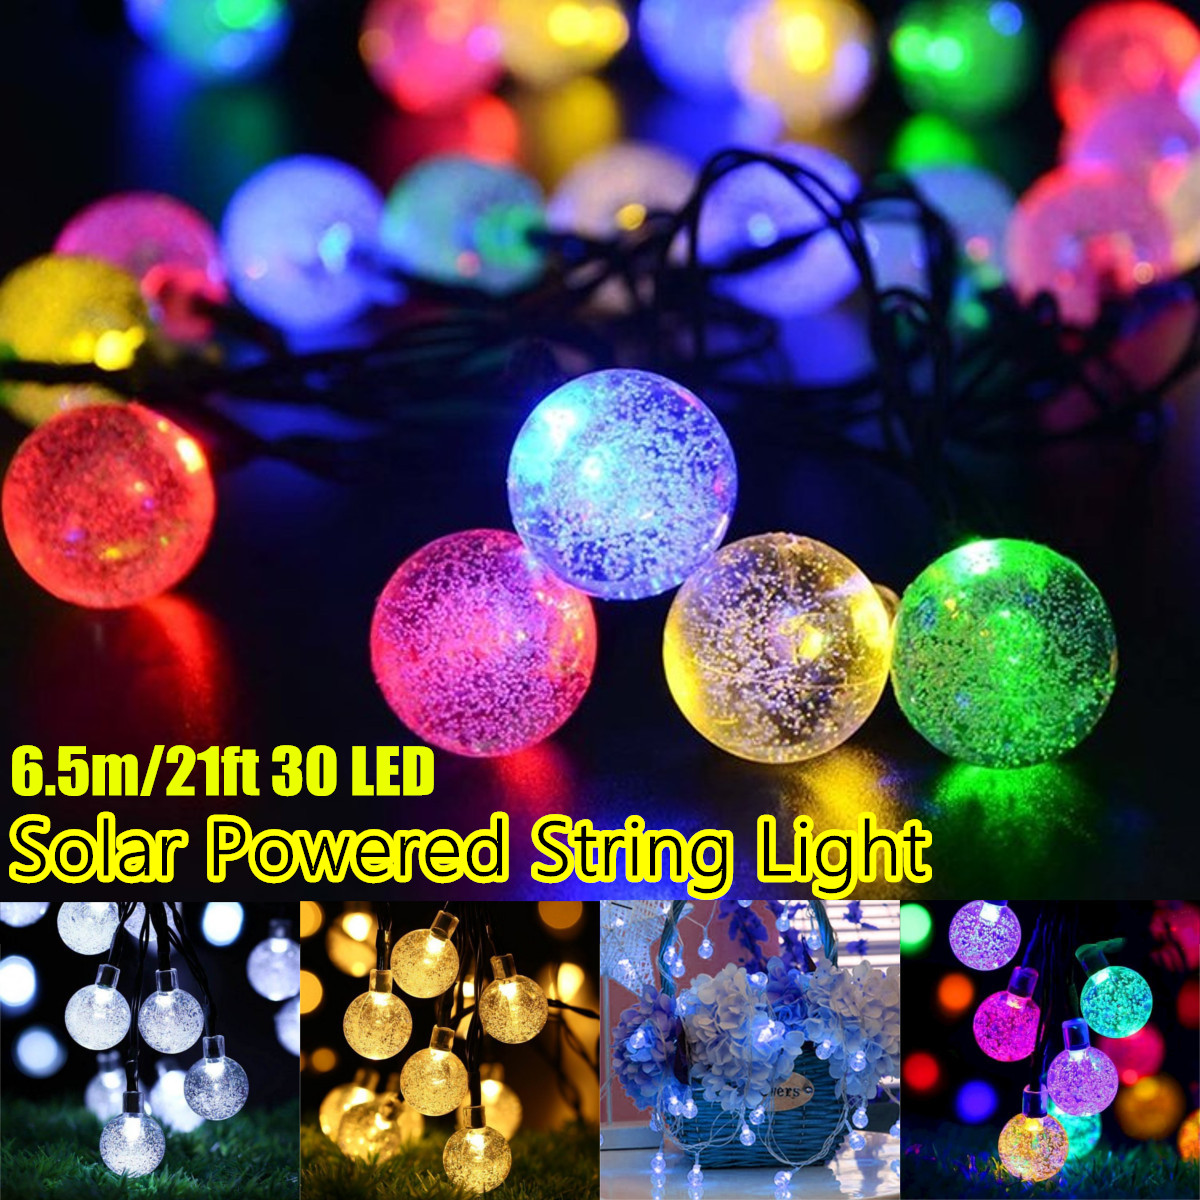 21ft-Solar-Powered-String-Lights-30-Crystal-Balls-Outdoor-Home-LED-Fairy-Lights-Decorations-1605227-1